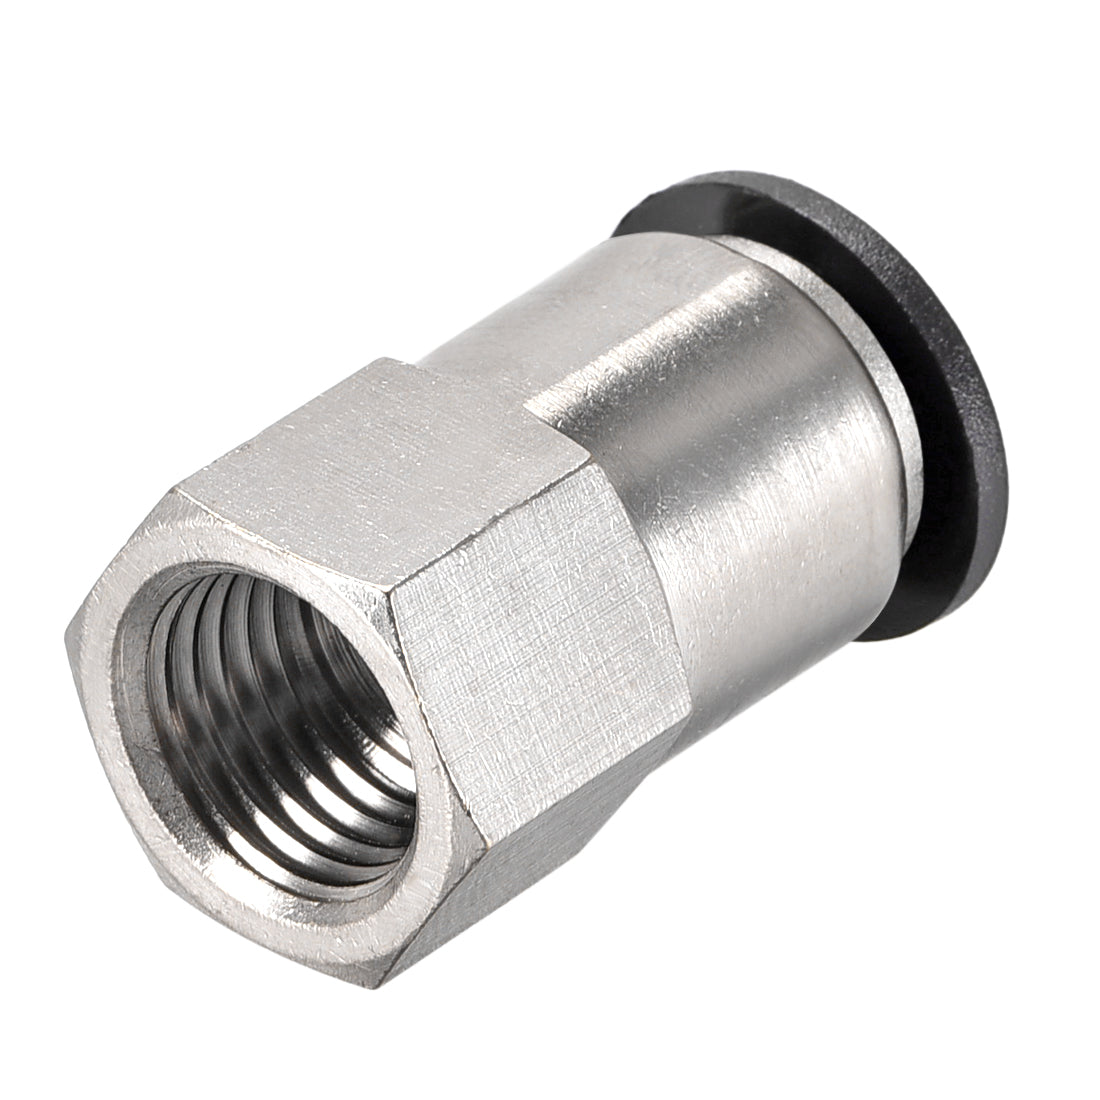 uxcell Uxcell Push to Connect Tube Fitting Adapter 10mm Tube OD x 1/4 PT Female Straight Pneumatic Connecter Pipe Fitting